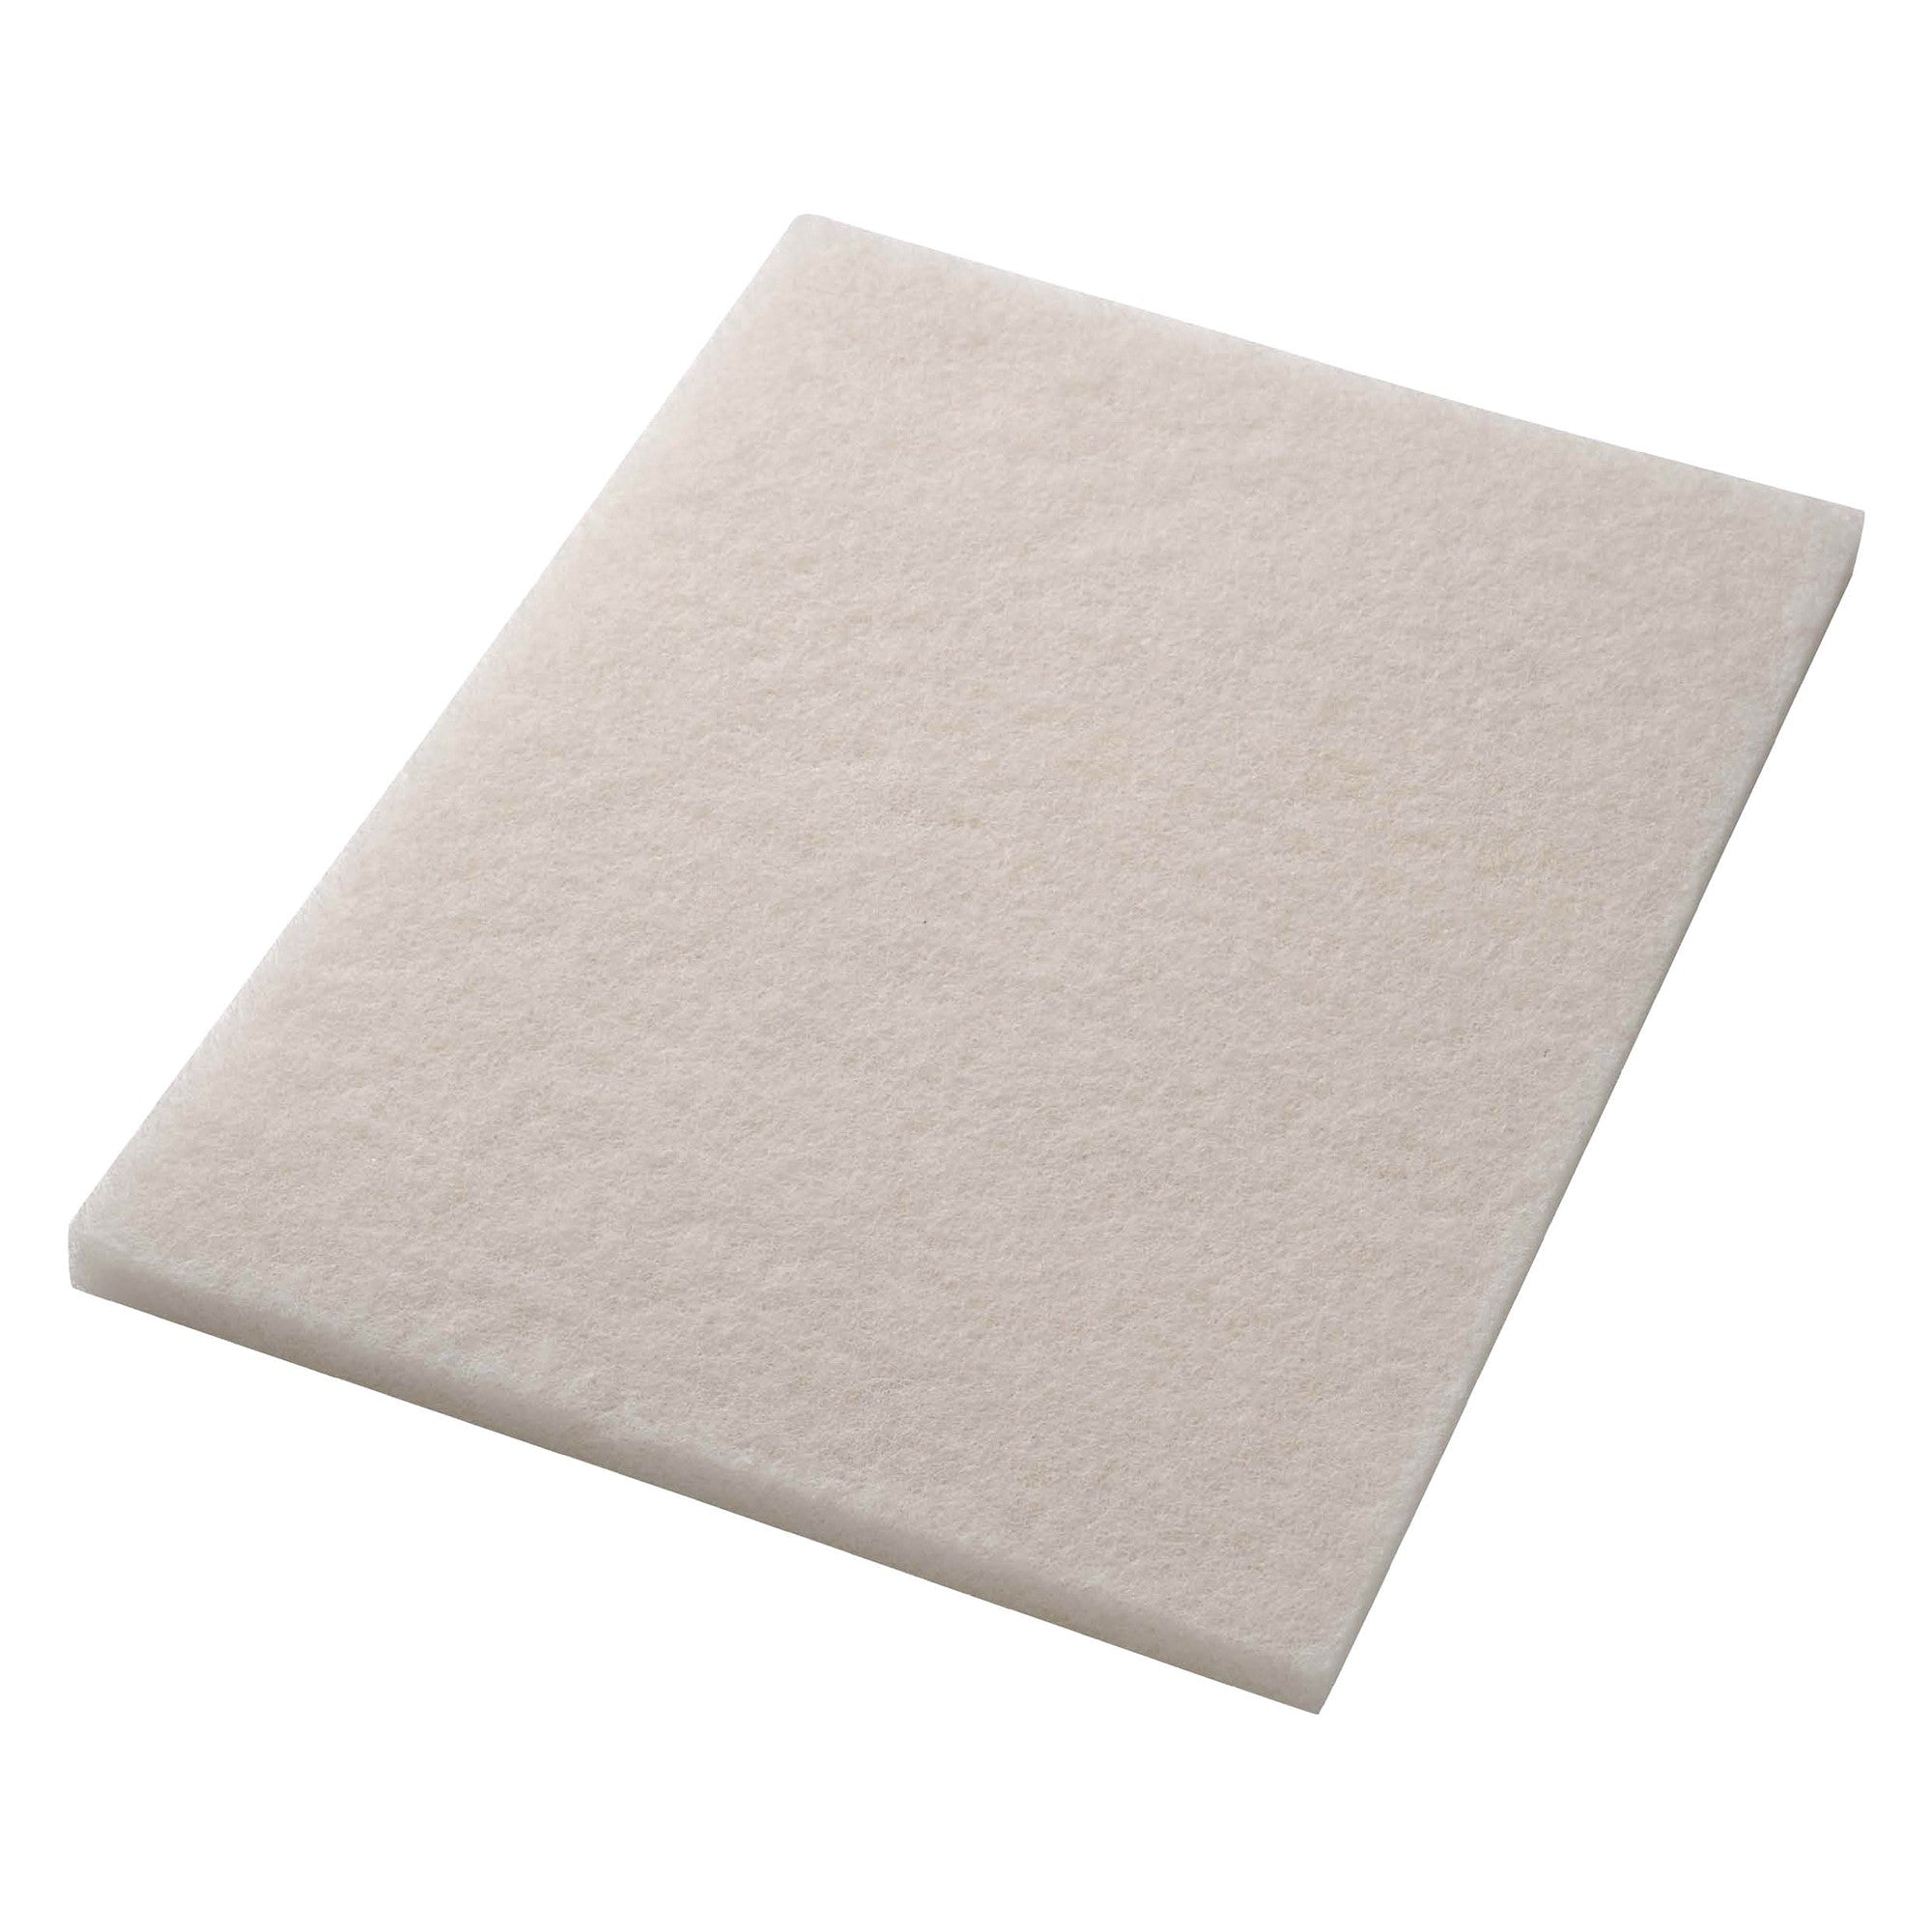 Pad weiss, 350x500 mm, Polyester